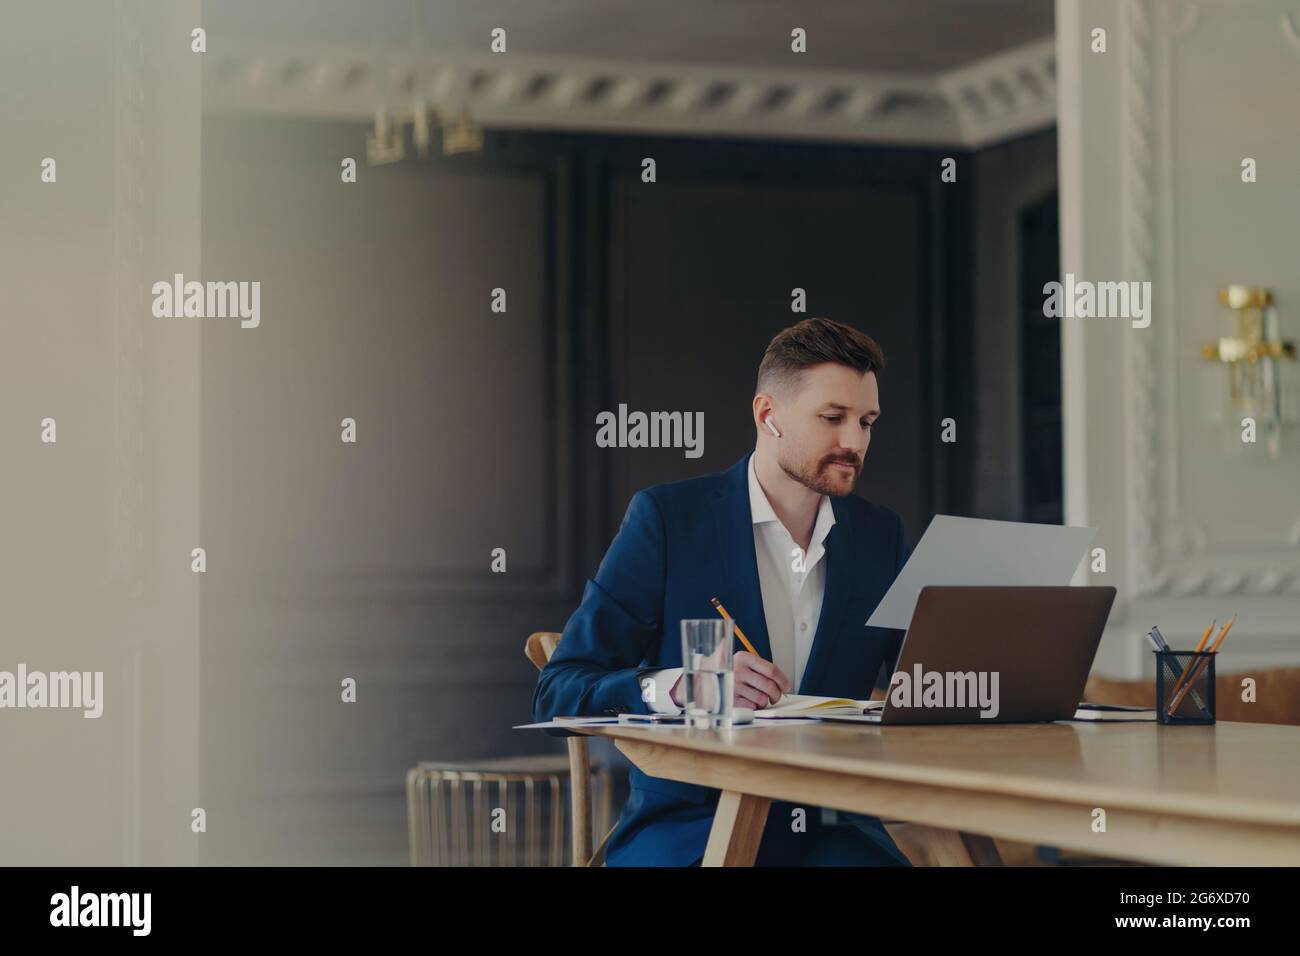 Serious businessman in smart suit writes in notepad concentrated at paper document poses at office desk with laptop computer glass of water uses Stock Photo